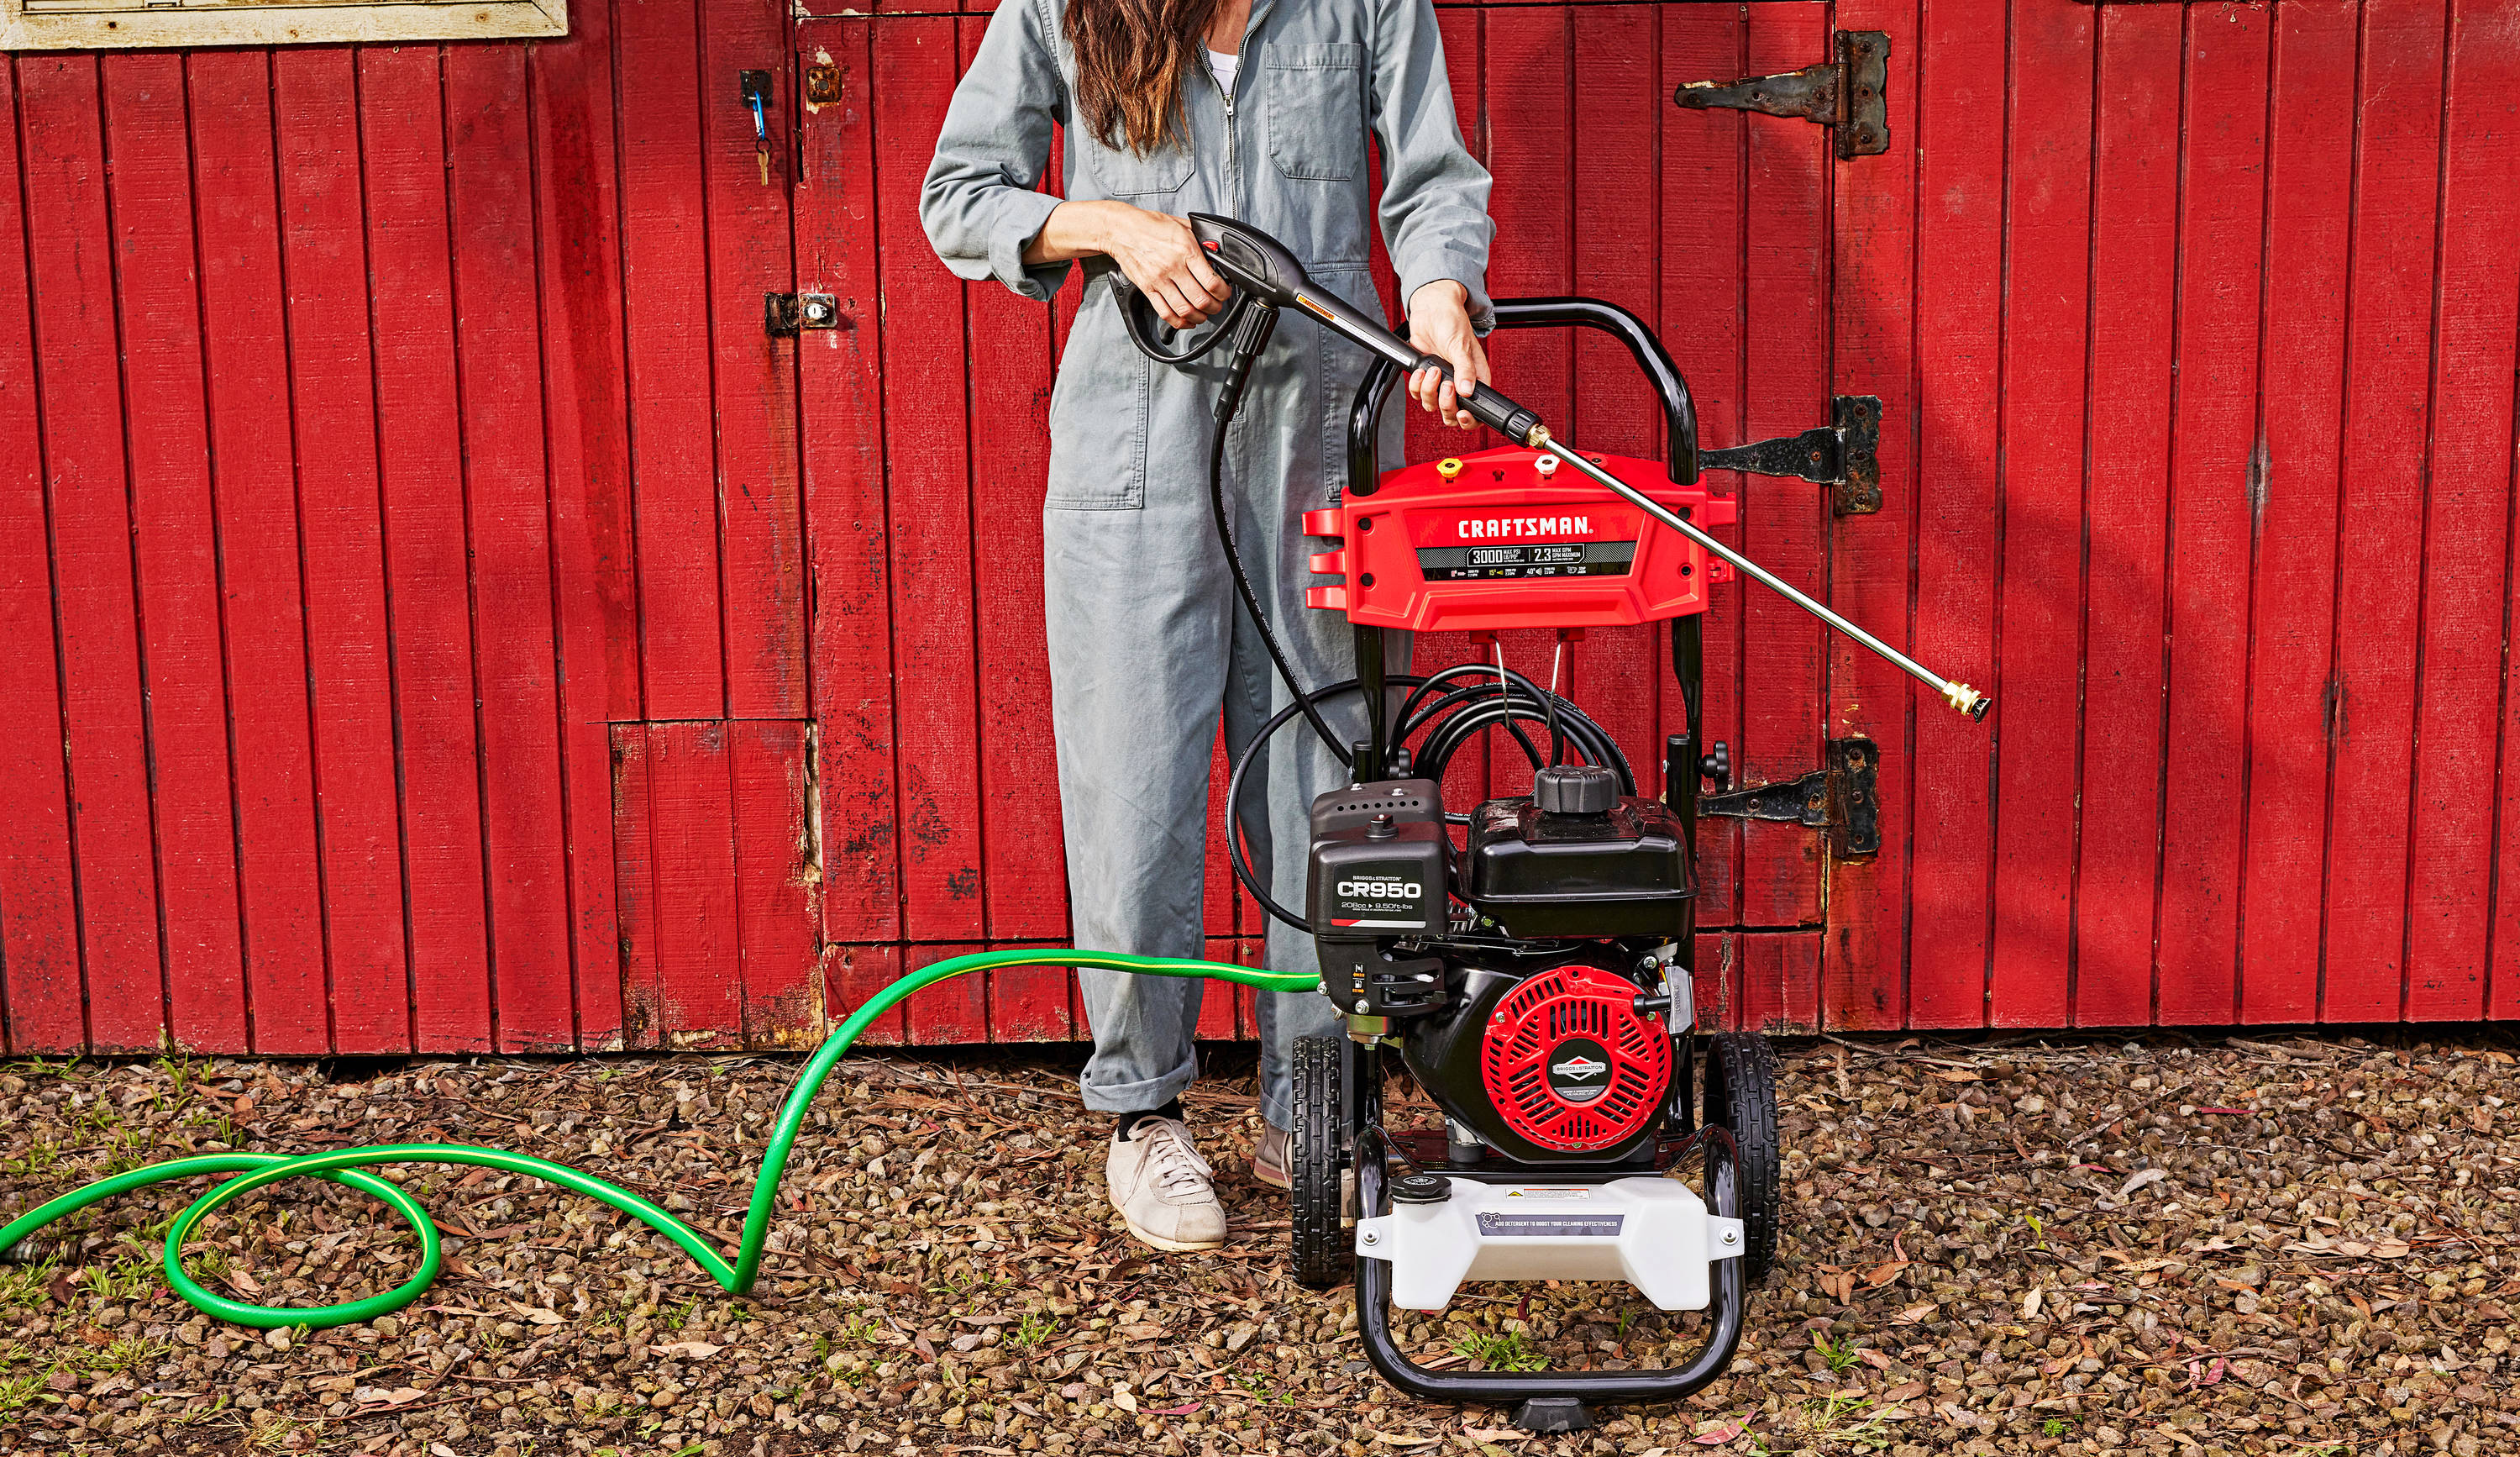 CRAFTSMAN 3000 PSI 2.3-Gallons Cold Water Gas Pressure Washer in the Pressure  Washers department at